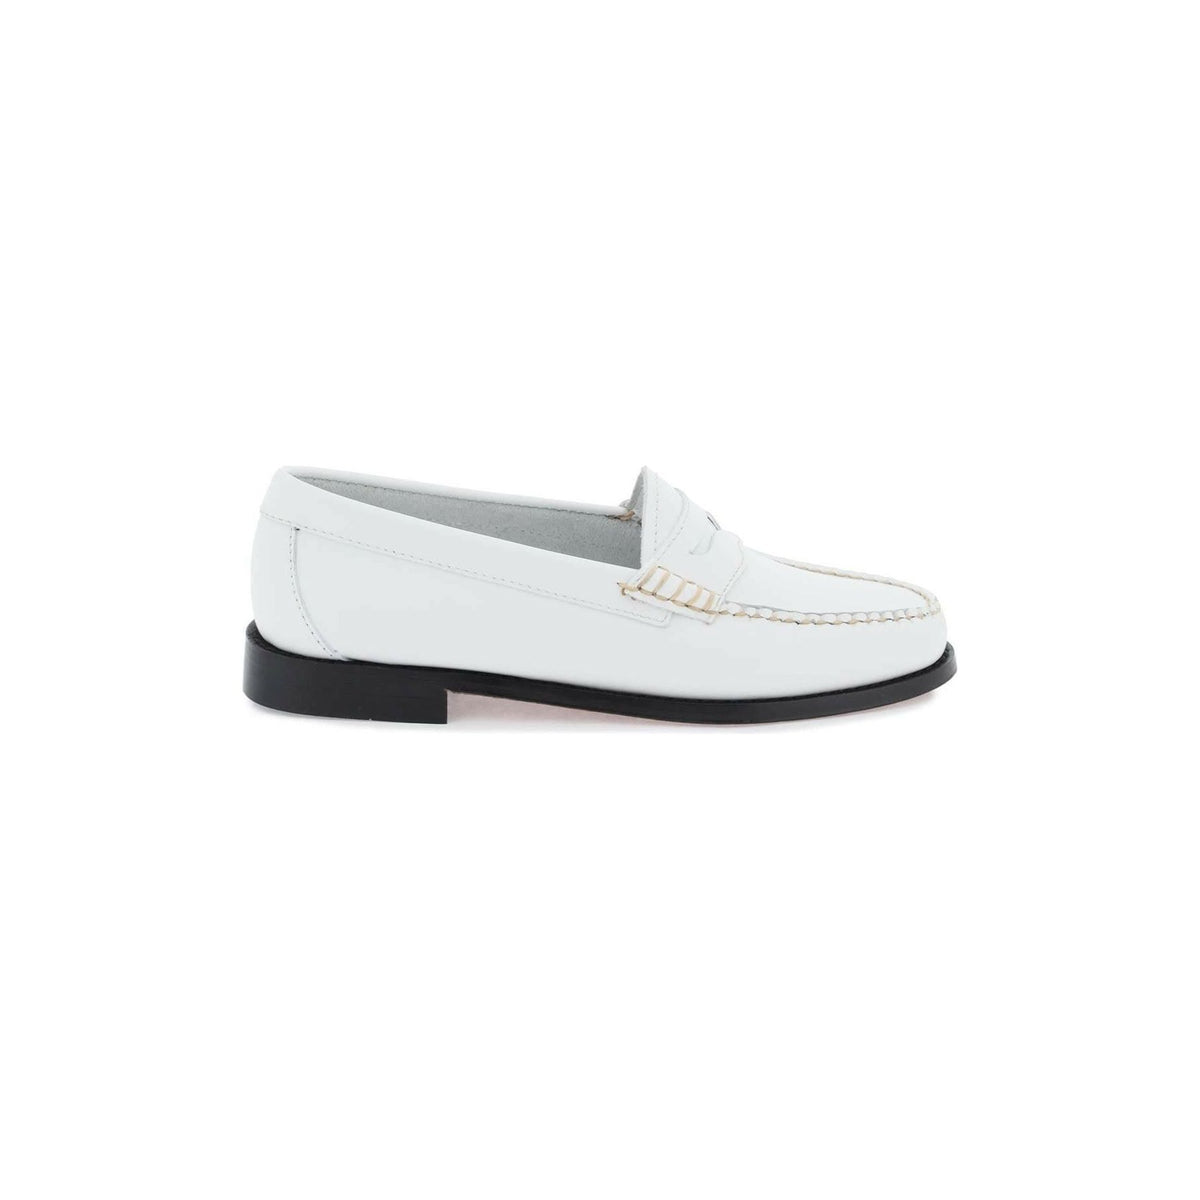 G.H. BASS - White Handcrafted Leather Weejuns Penny Loafers - JOHN JULIA